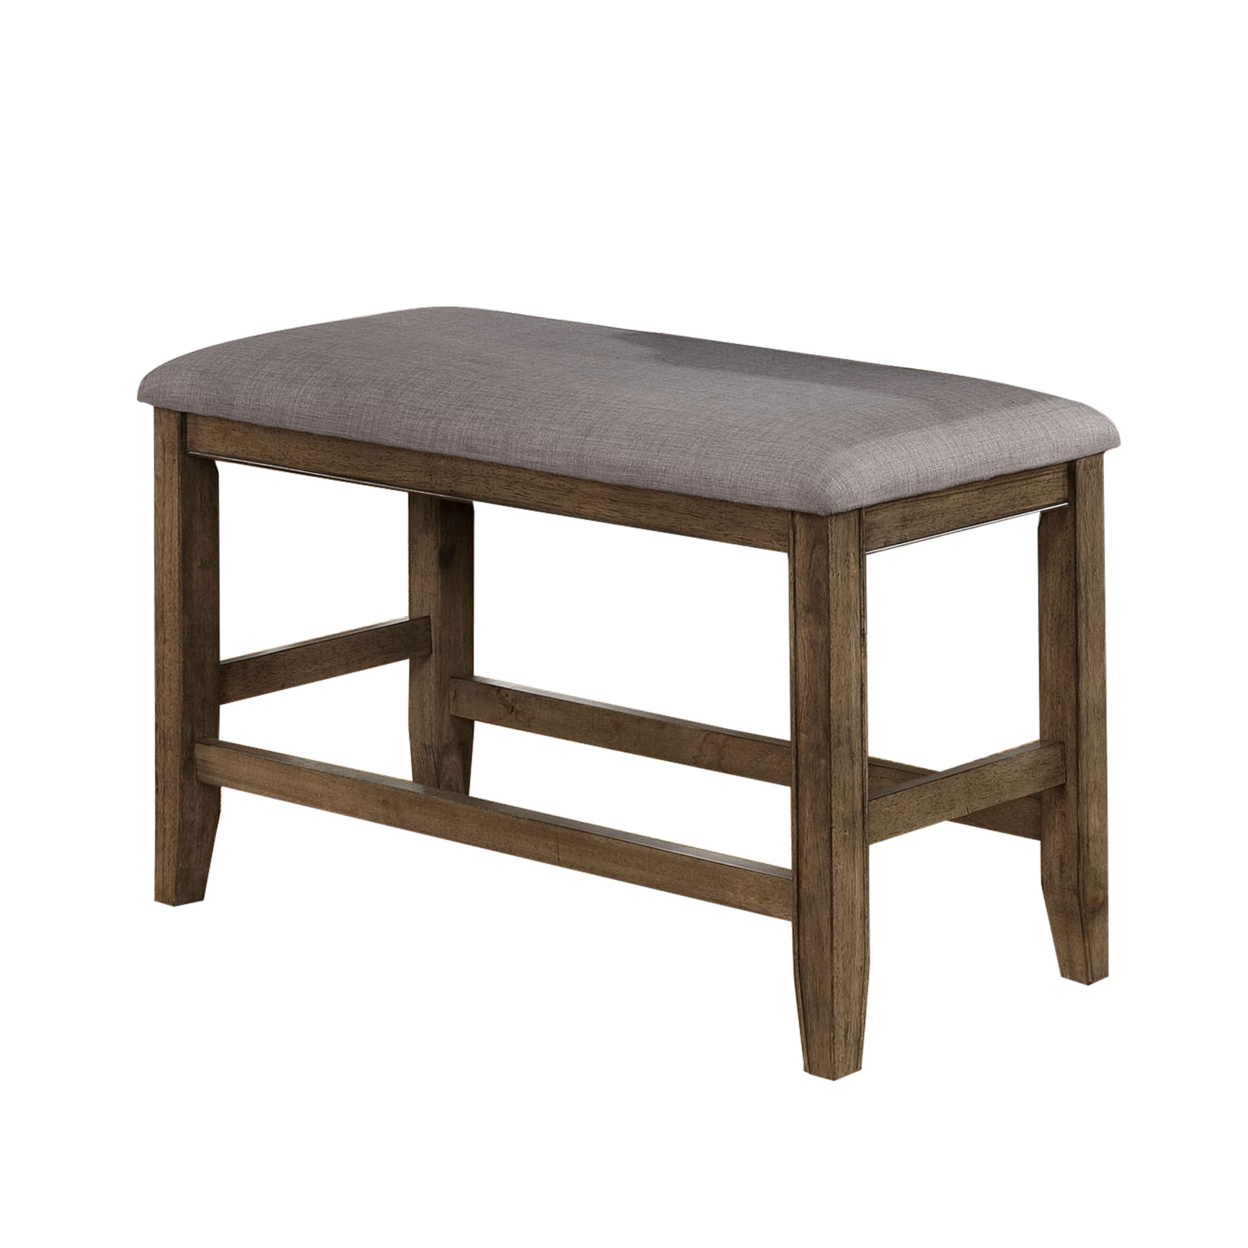 Counter Height Wooden Bench With Fabric Upholstered Seat, Brown And Gray- Saltoro Sherpi